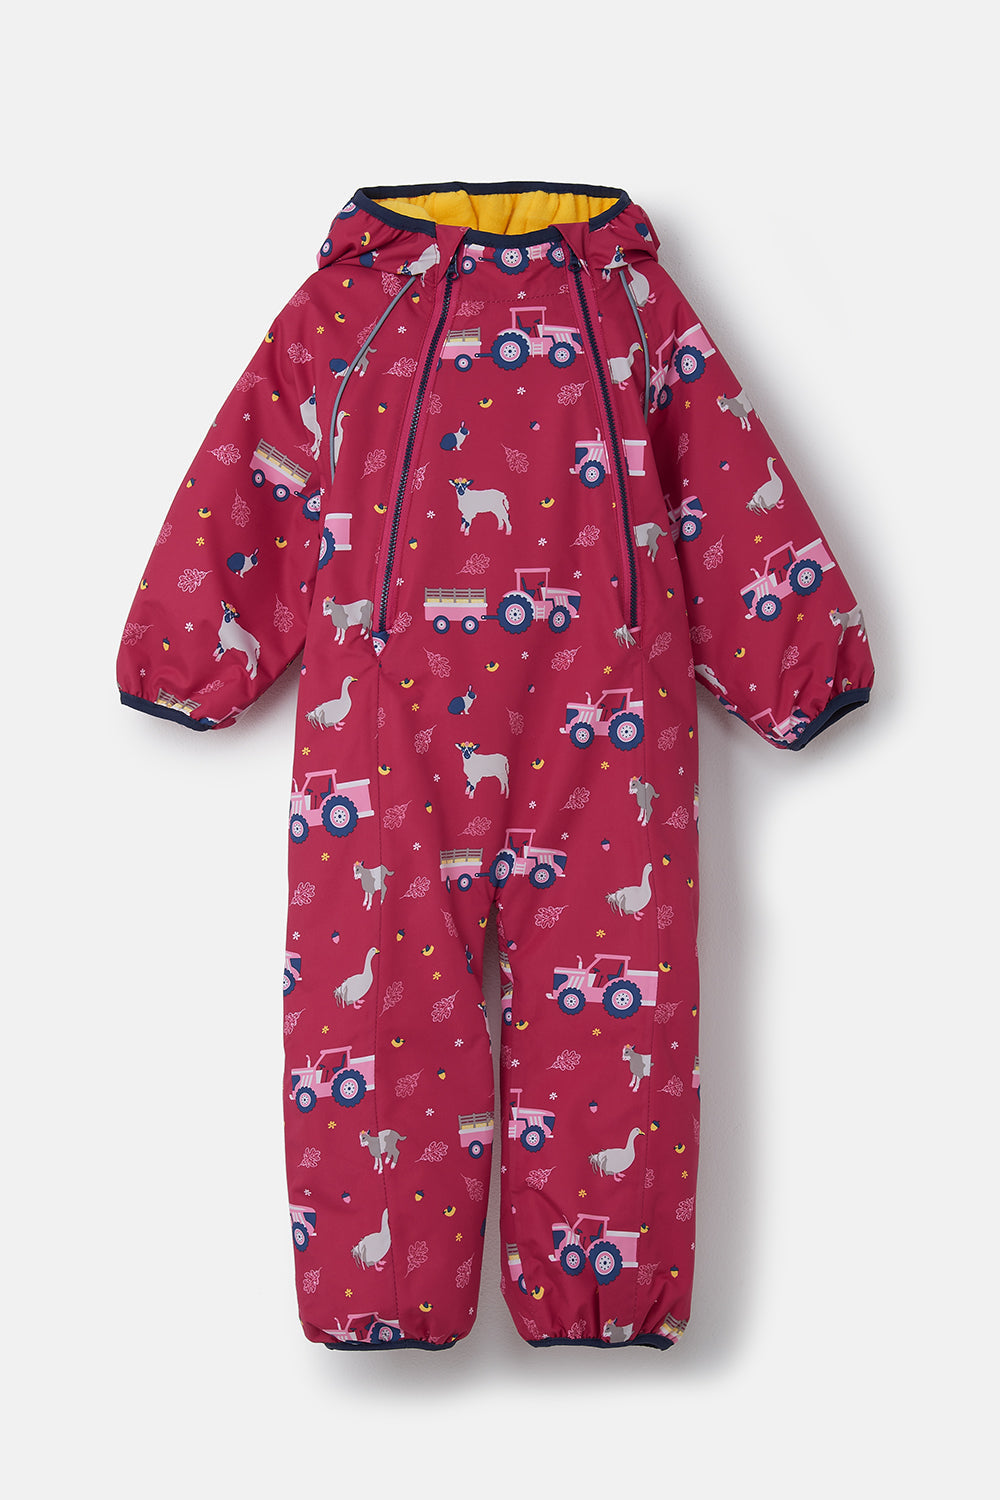 Jamie Puddlesuit - waterproof and breathable play suit